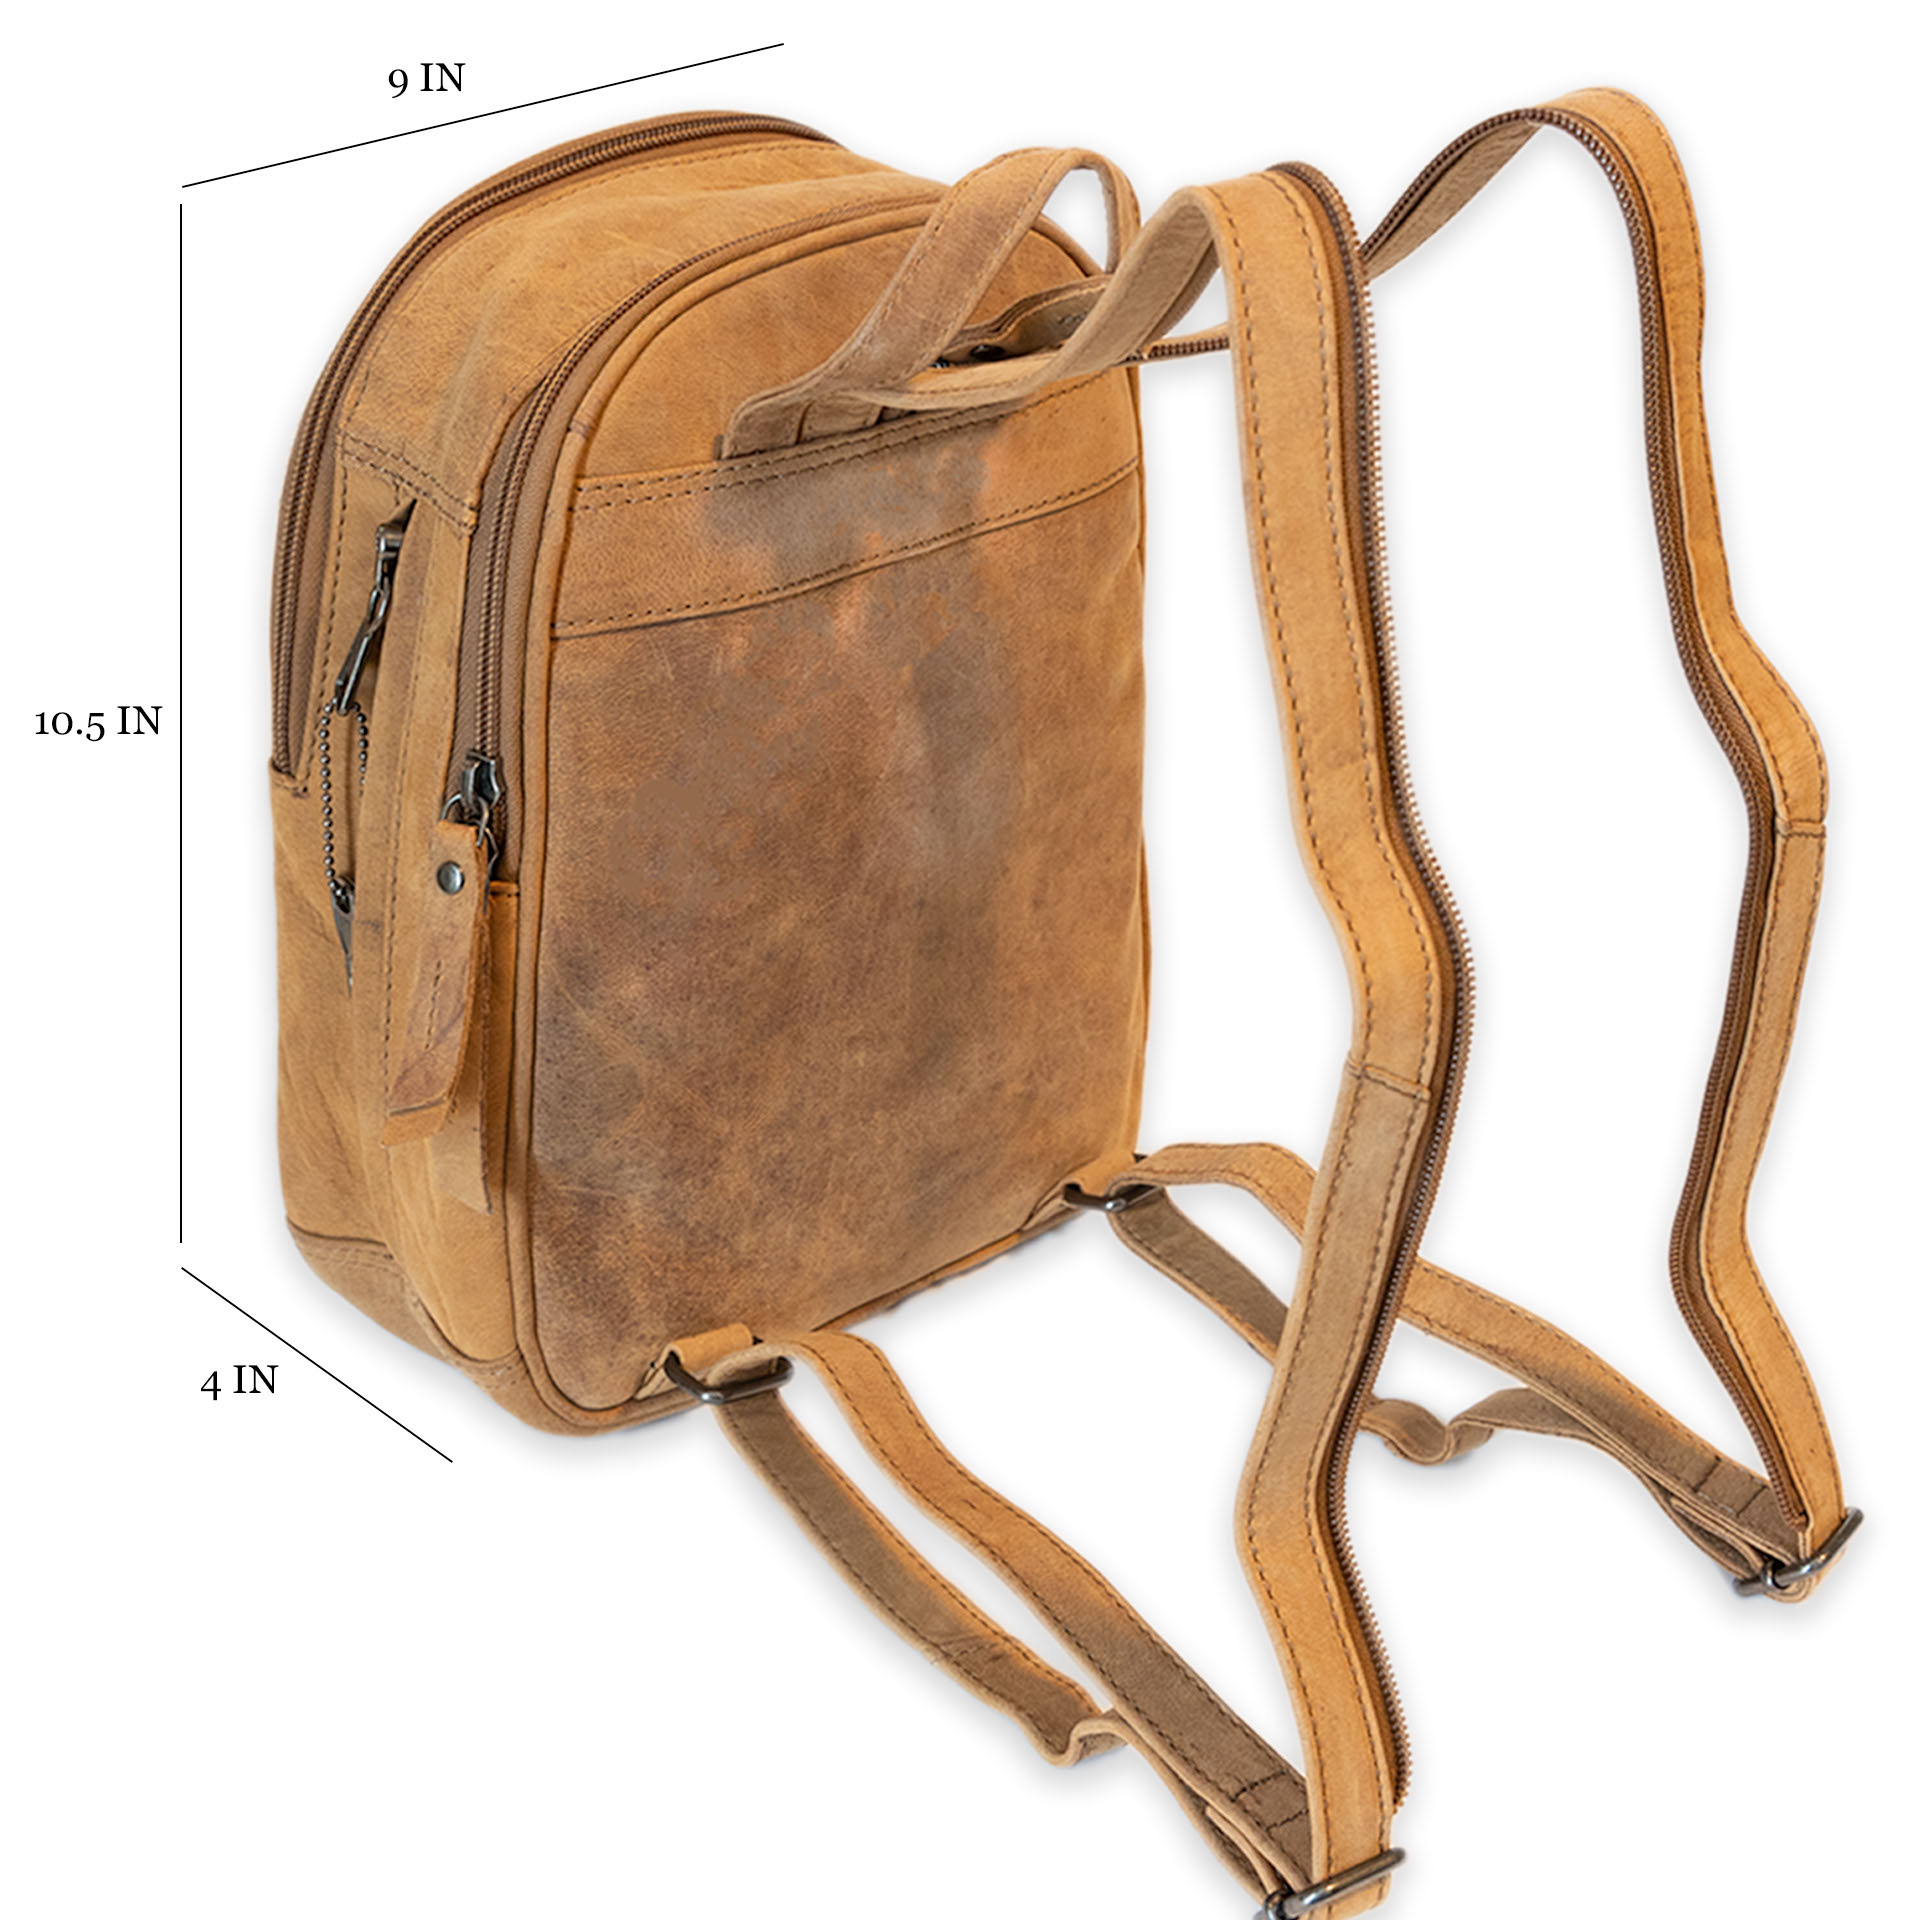 Daisy - Concealed Carry Leather Backpack ⋆ Her Tactical